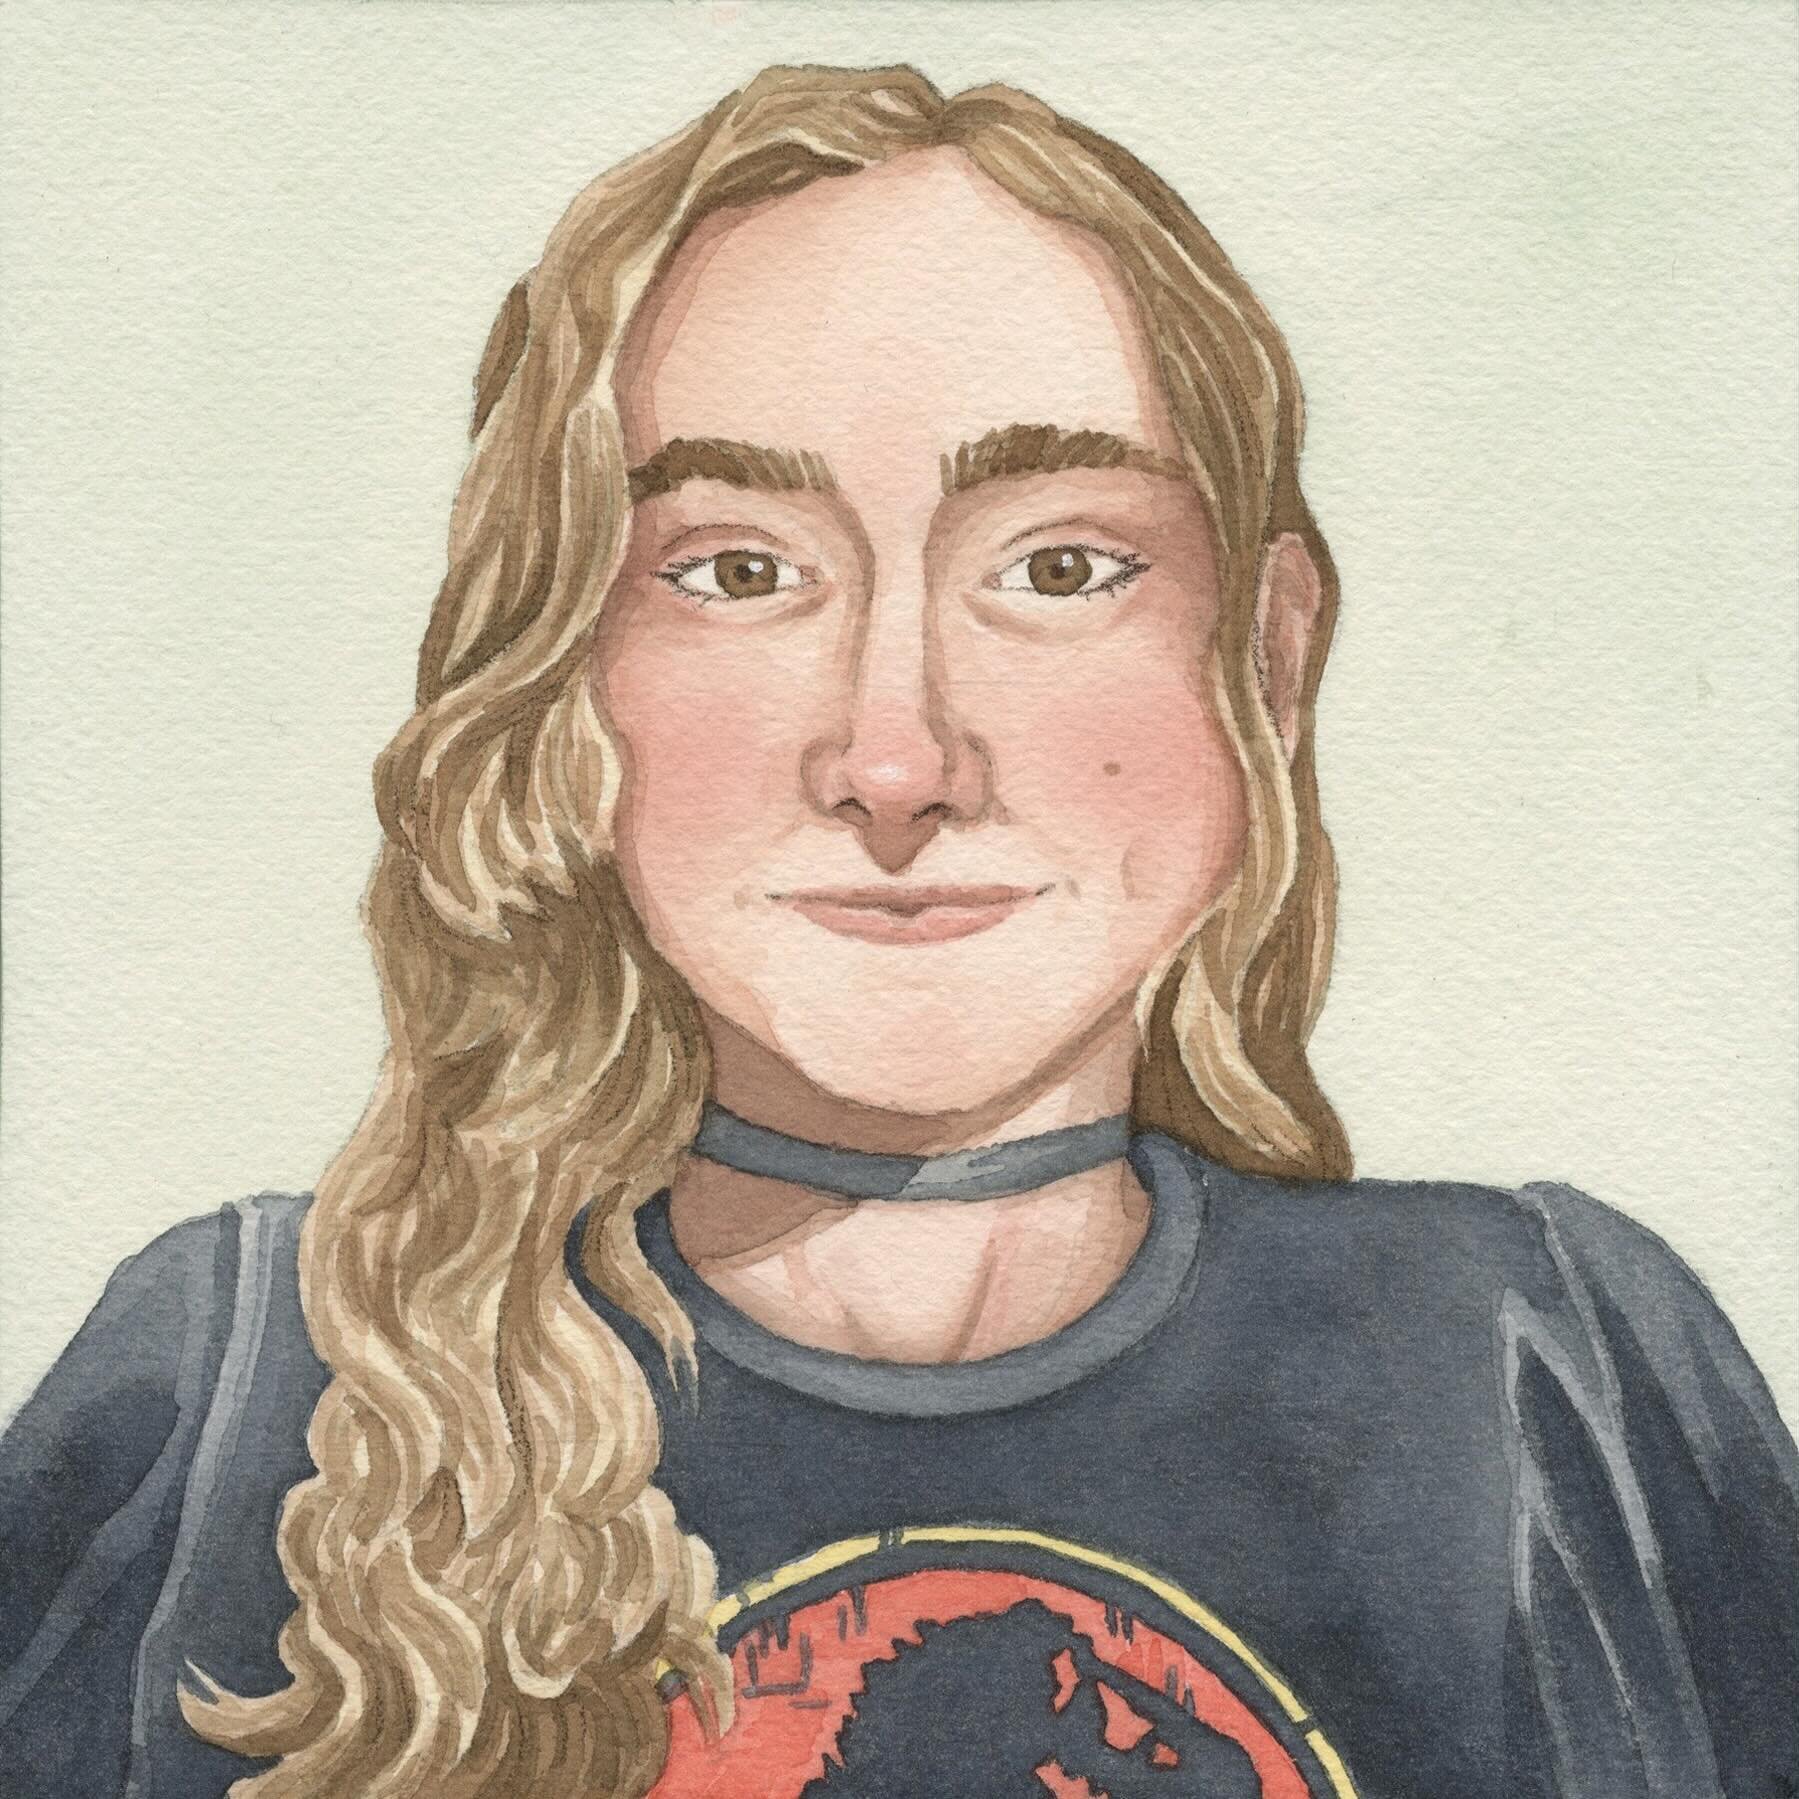 My new profile picture! A self portrait for the senior illustration portfolio night.
Watercolor, 6x6 mounted on wood panel

#watercolor #watercolorpainting #selfportrait #illustration #massart